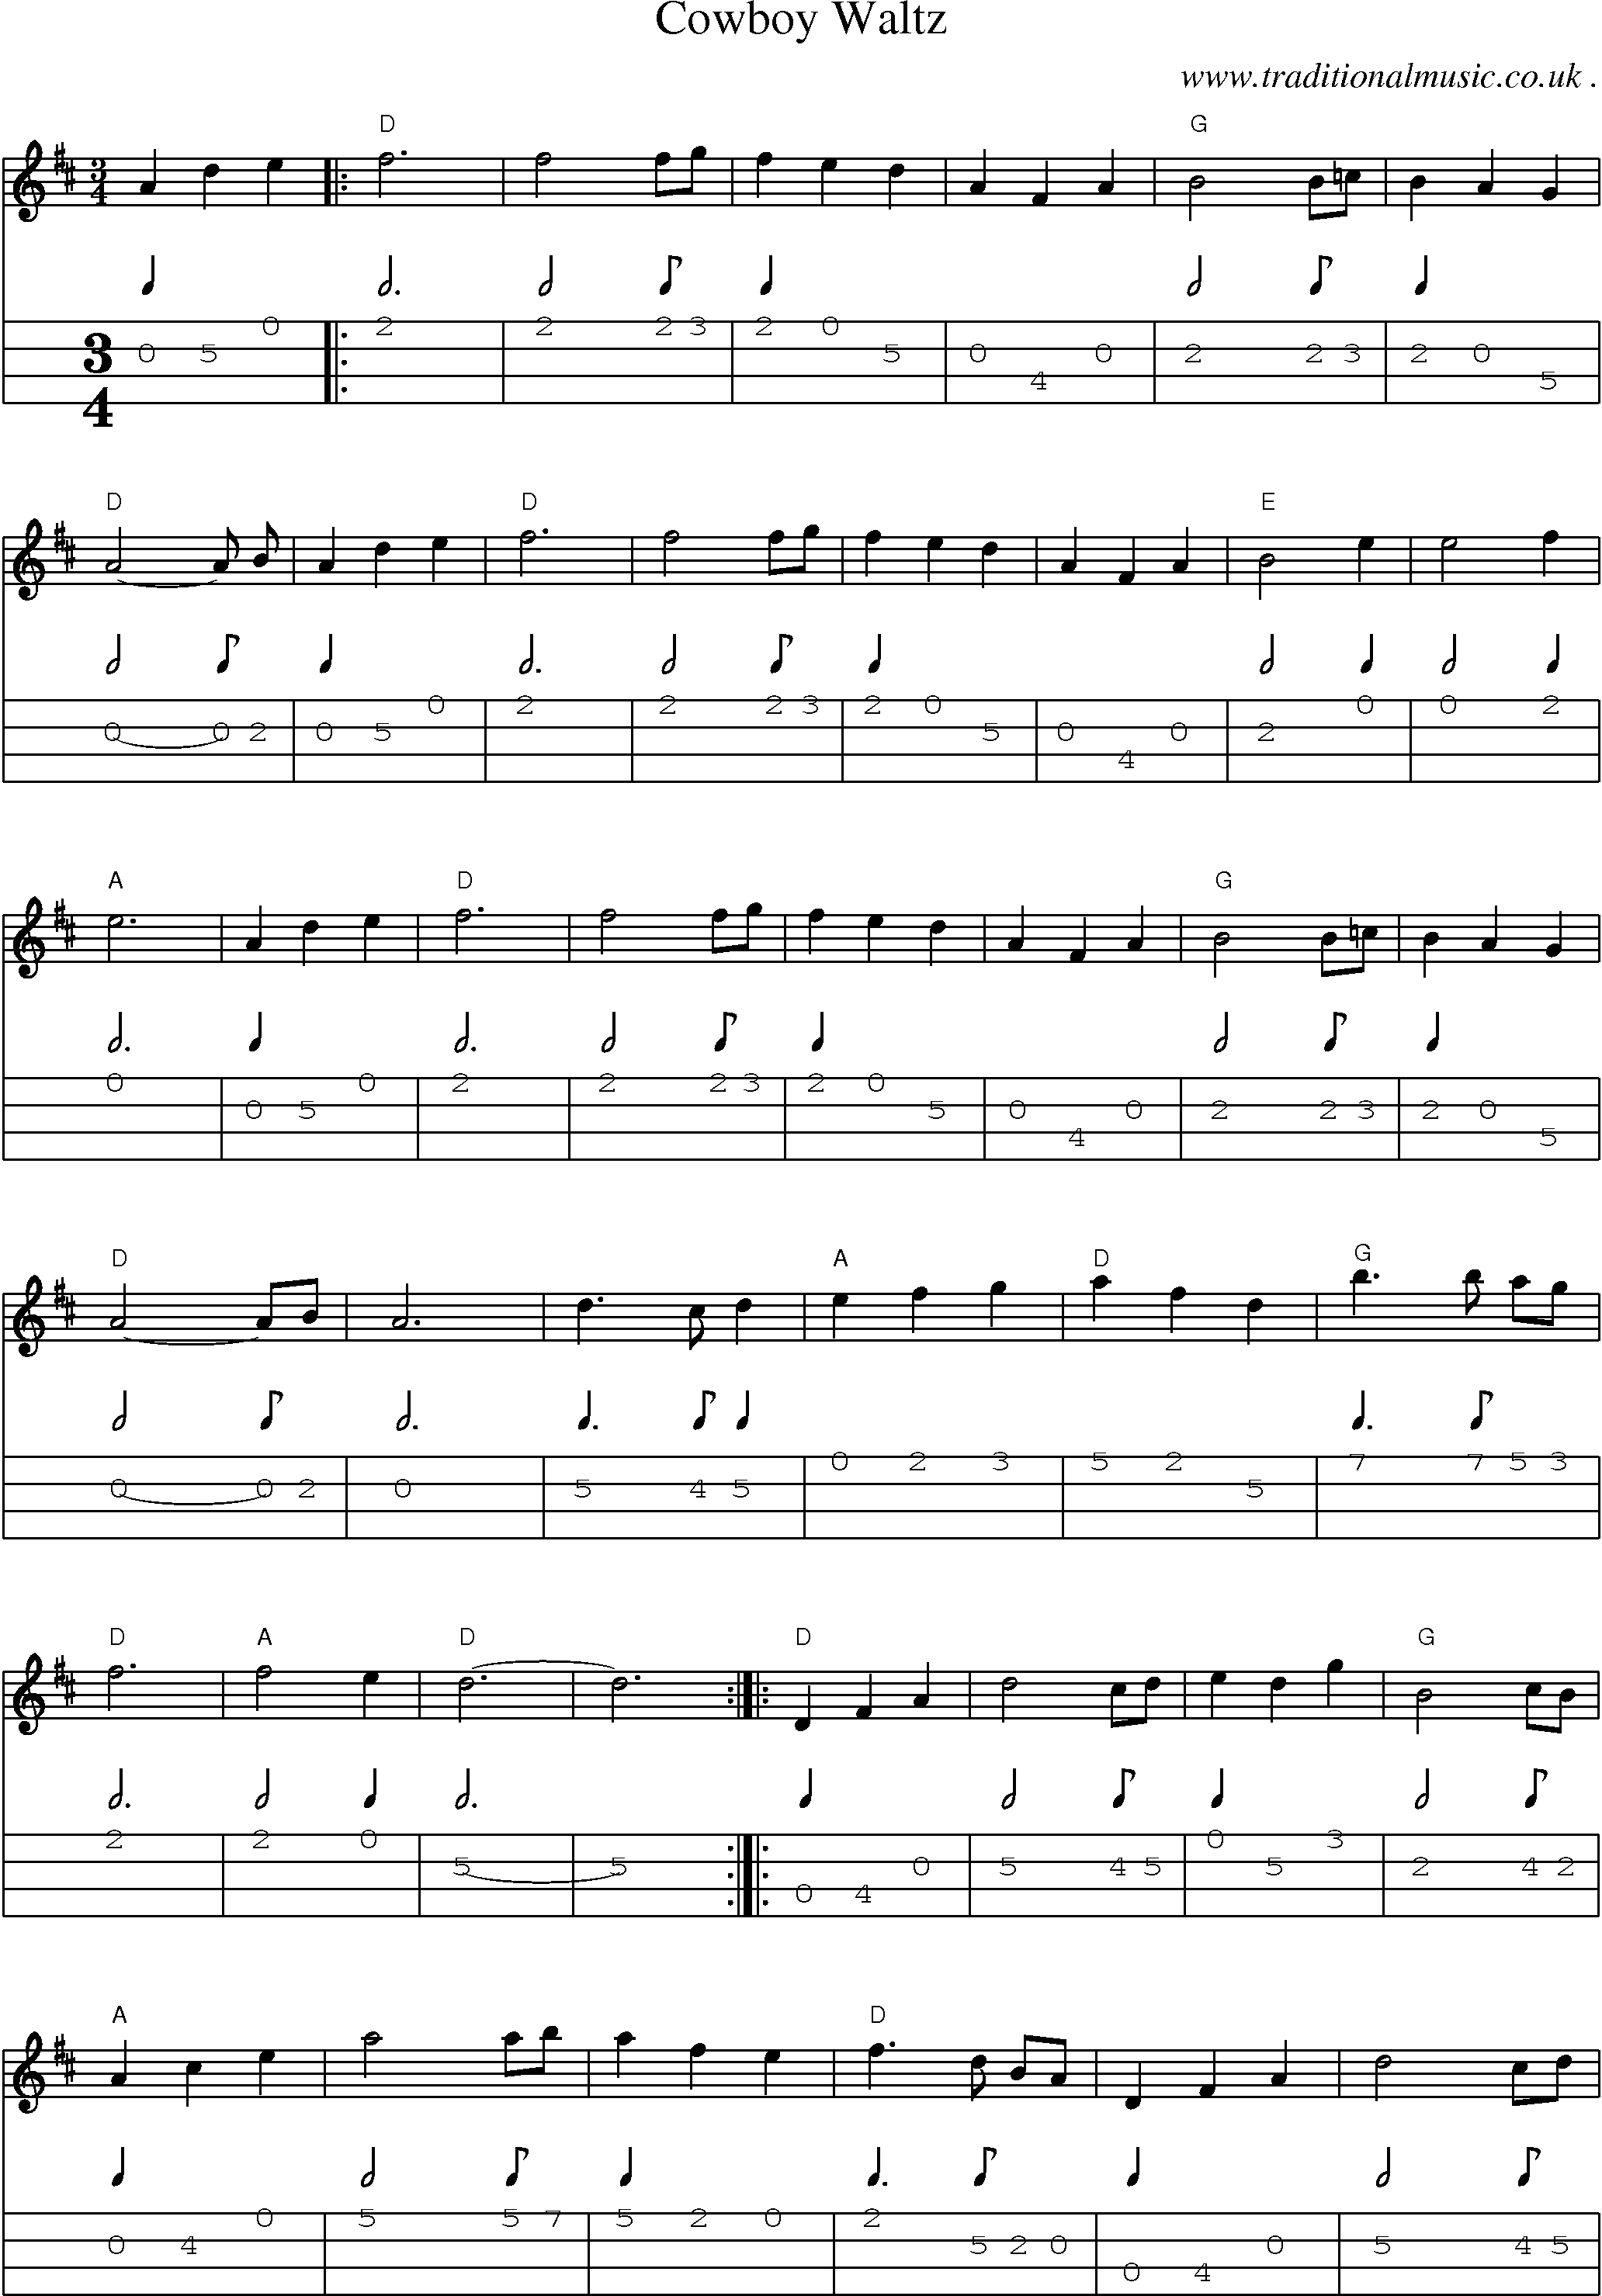 Music Score and Guitar Tabs for Cowboy Waltz